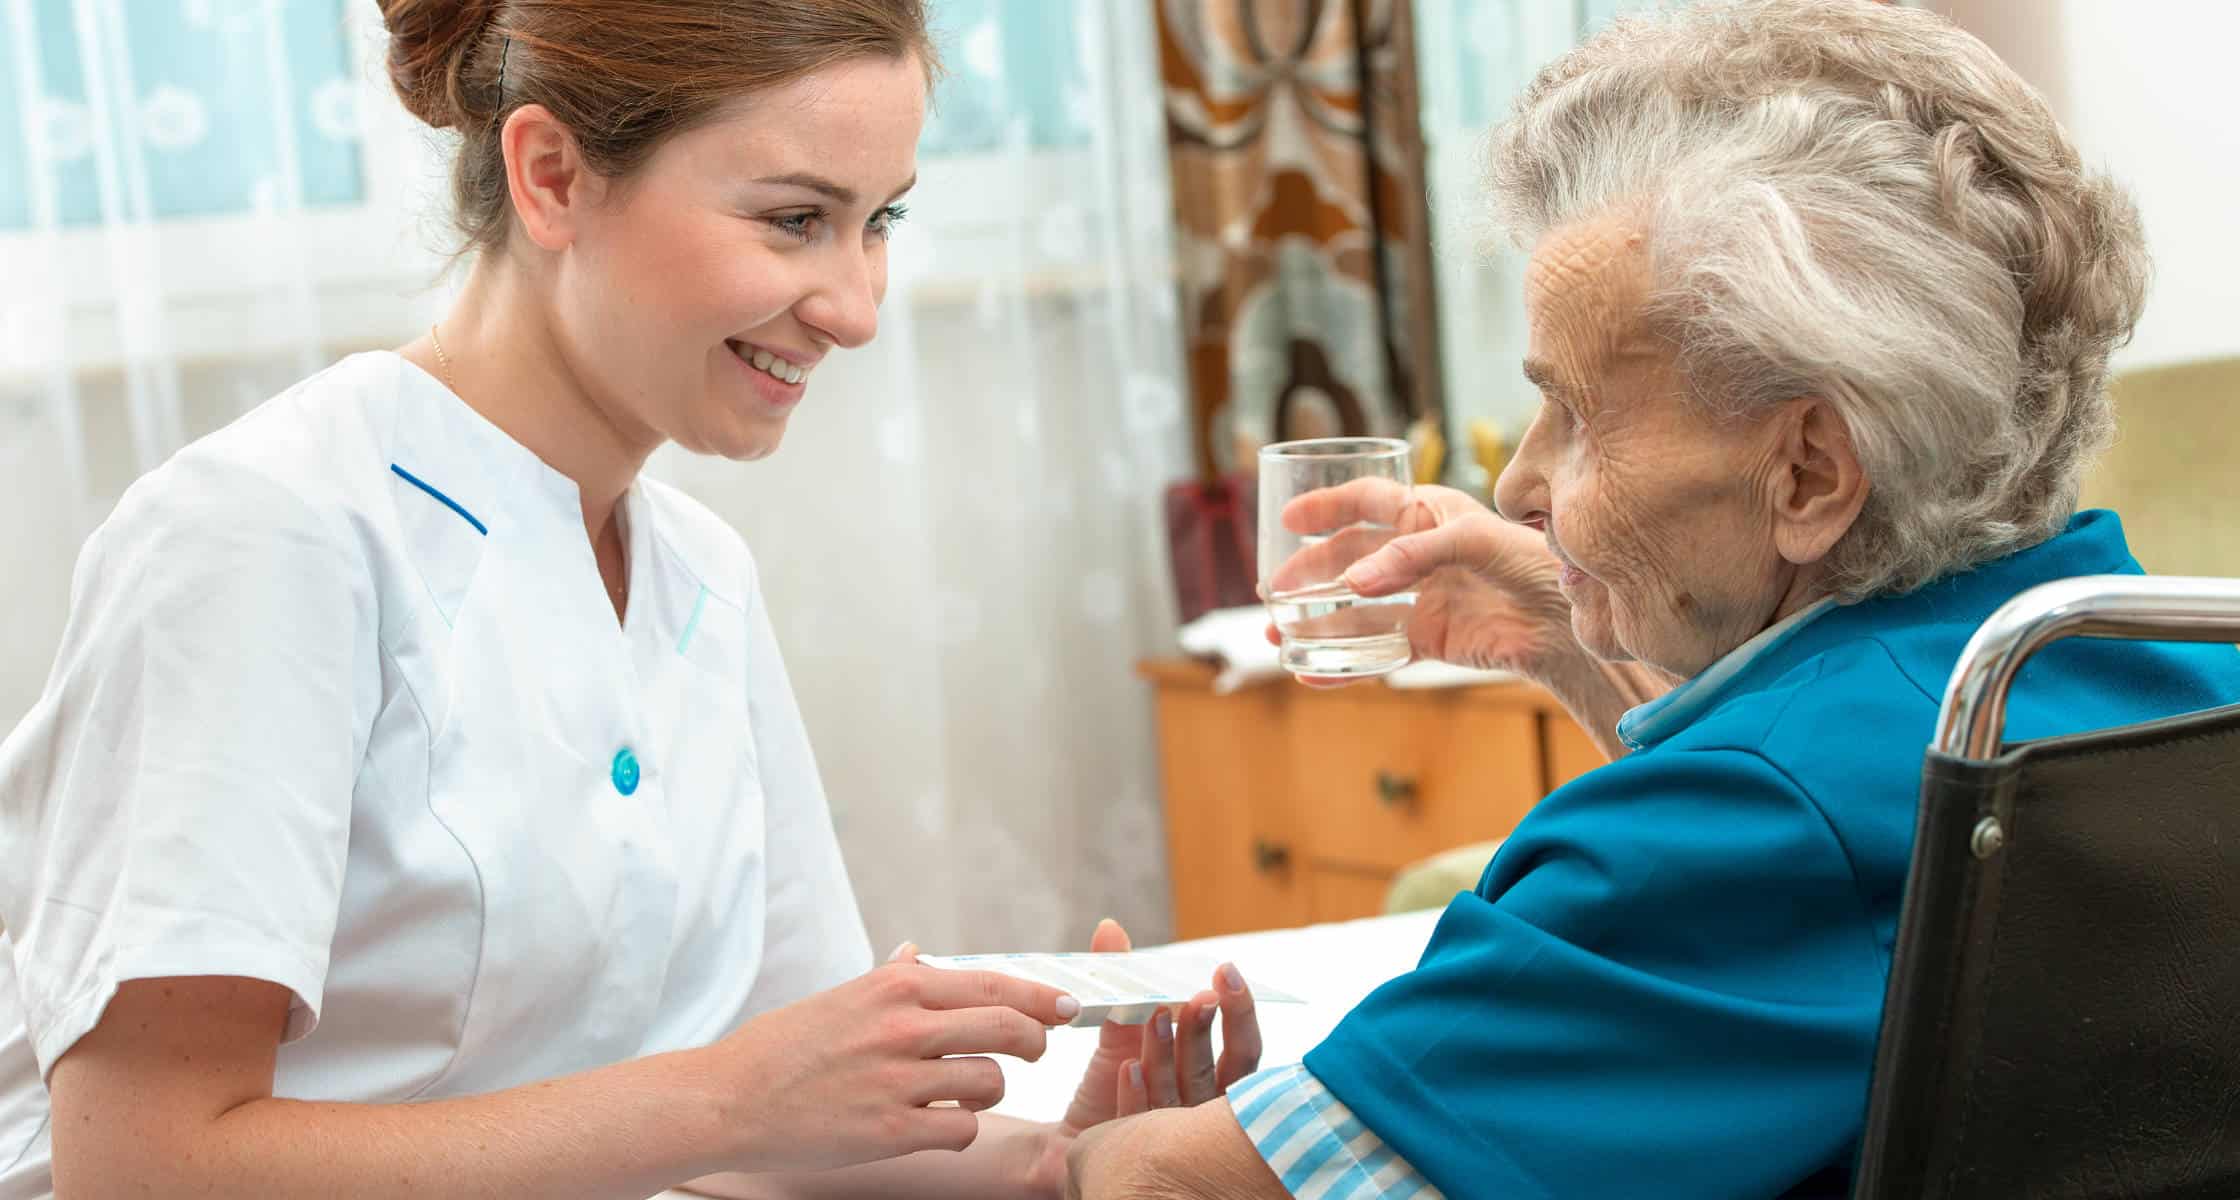 About Home Care Agency